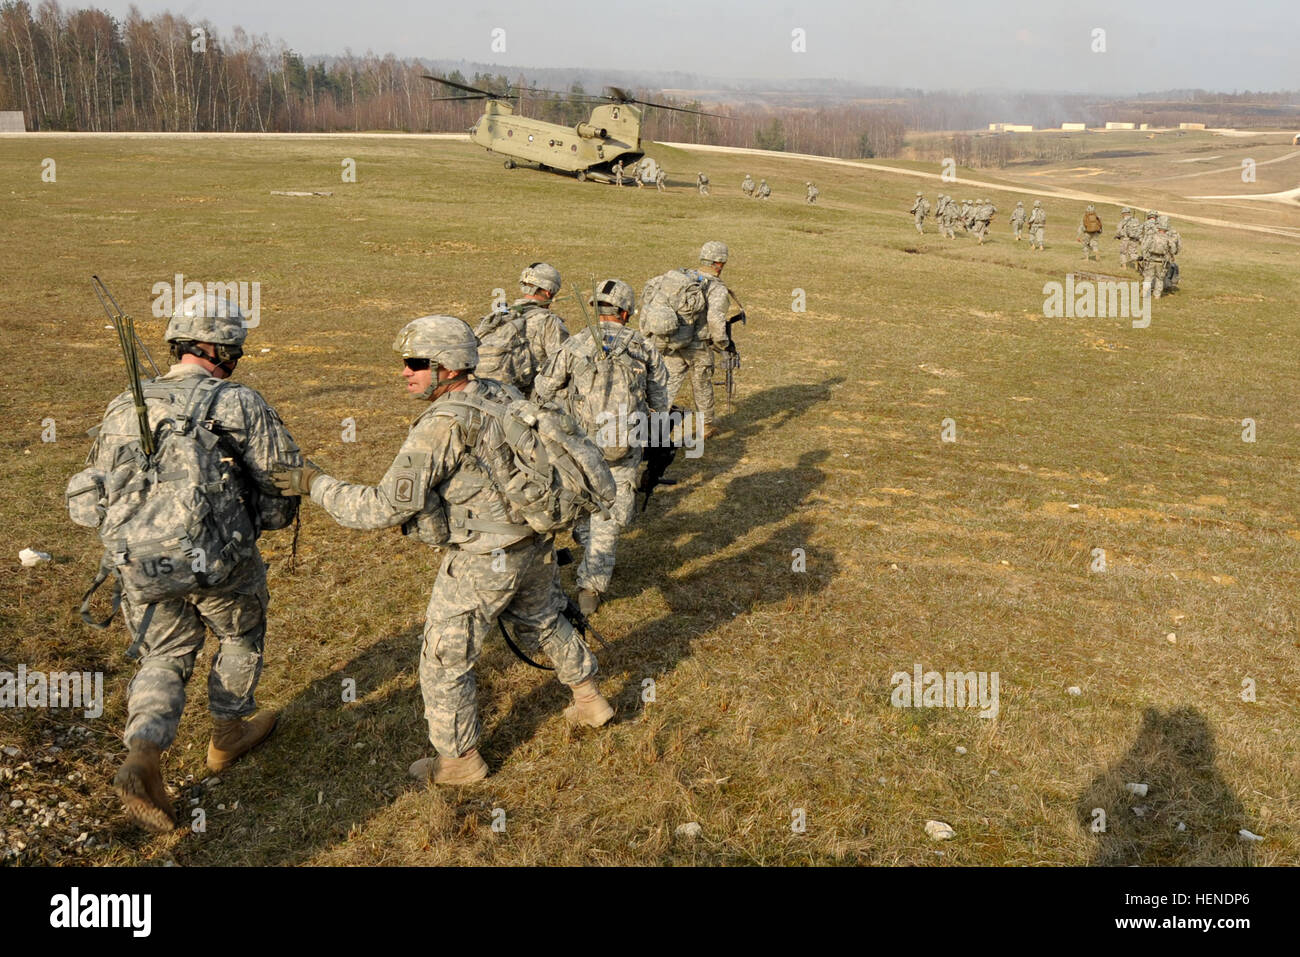 U.S. Army paratroopers, assigned to 1st Battalion, 503rd Infantry Regiment, 173rd Infantry Brigade Combat Team (Airborne), board a CH-47 Chinook during a combined-arms live-fire exercise on March 28, 2014. Grafenwoehr and Hohenfels Training Areas in order to prepare the 12th Combat Aviation Brigade to deploy to Afghanistan to provide medical evacuation and combat support to the NATO International Security Assistance Force mission. (U.S. Army photo by Gertrud Zach/released) CALFEX at JMTC Grafenwoehr, Germany 140328-A-HE539-0388 Stock Photo